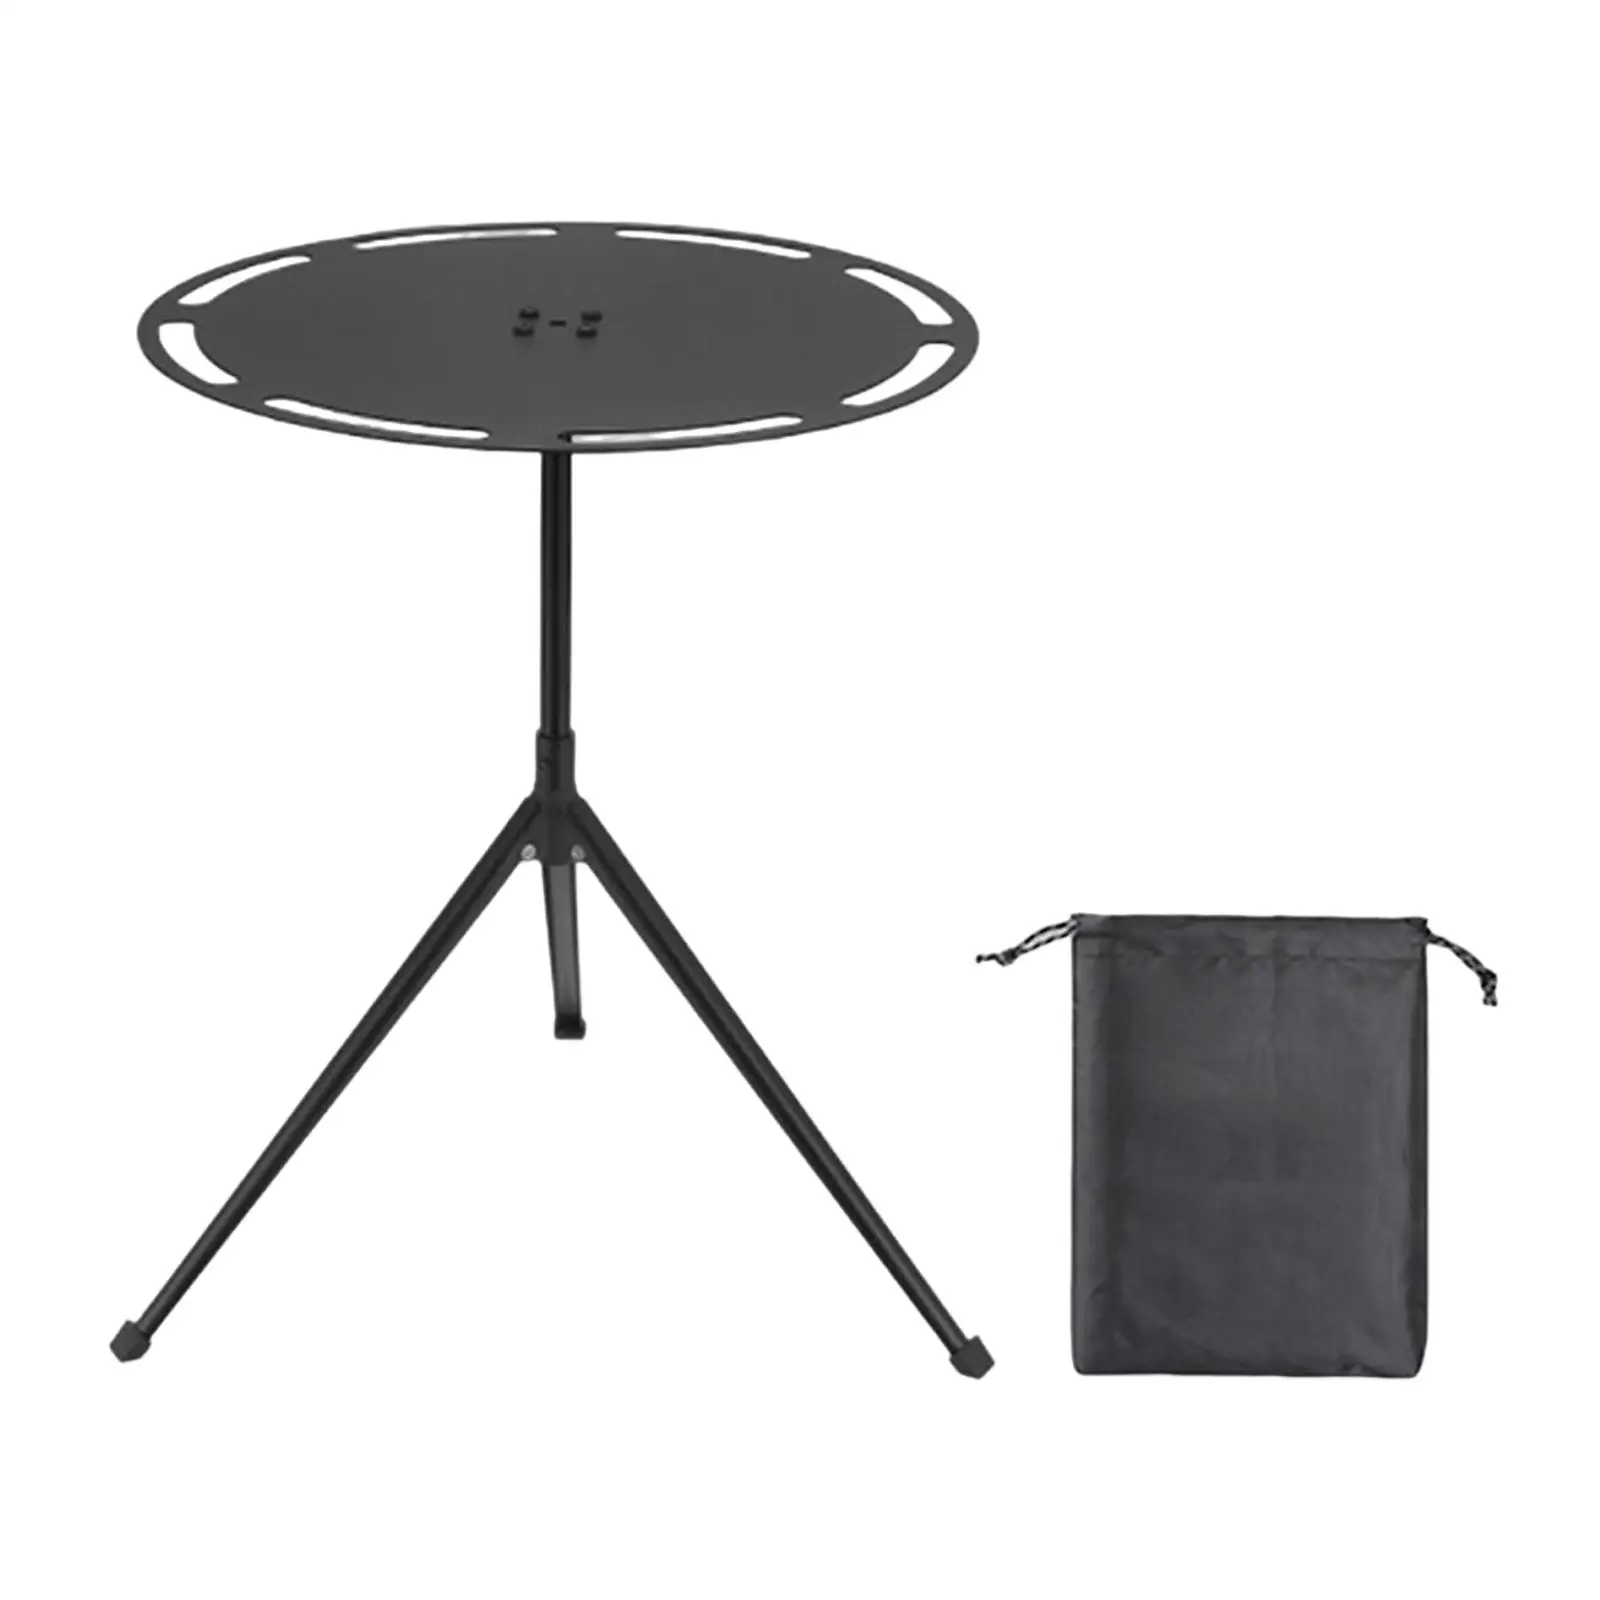 Camping Table Portable Adjustable Legs Easy Installation Mini Table Picnic Table for Outdoor Fishing Backpacking Hiking Barbecue